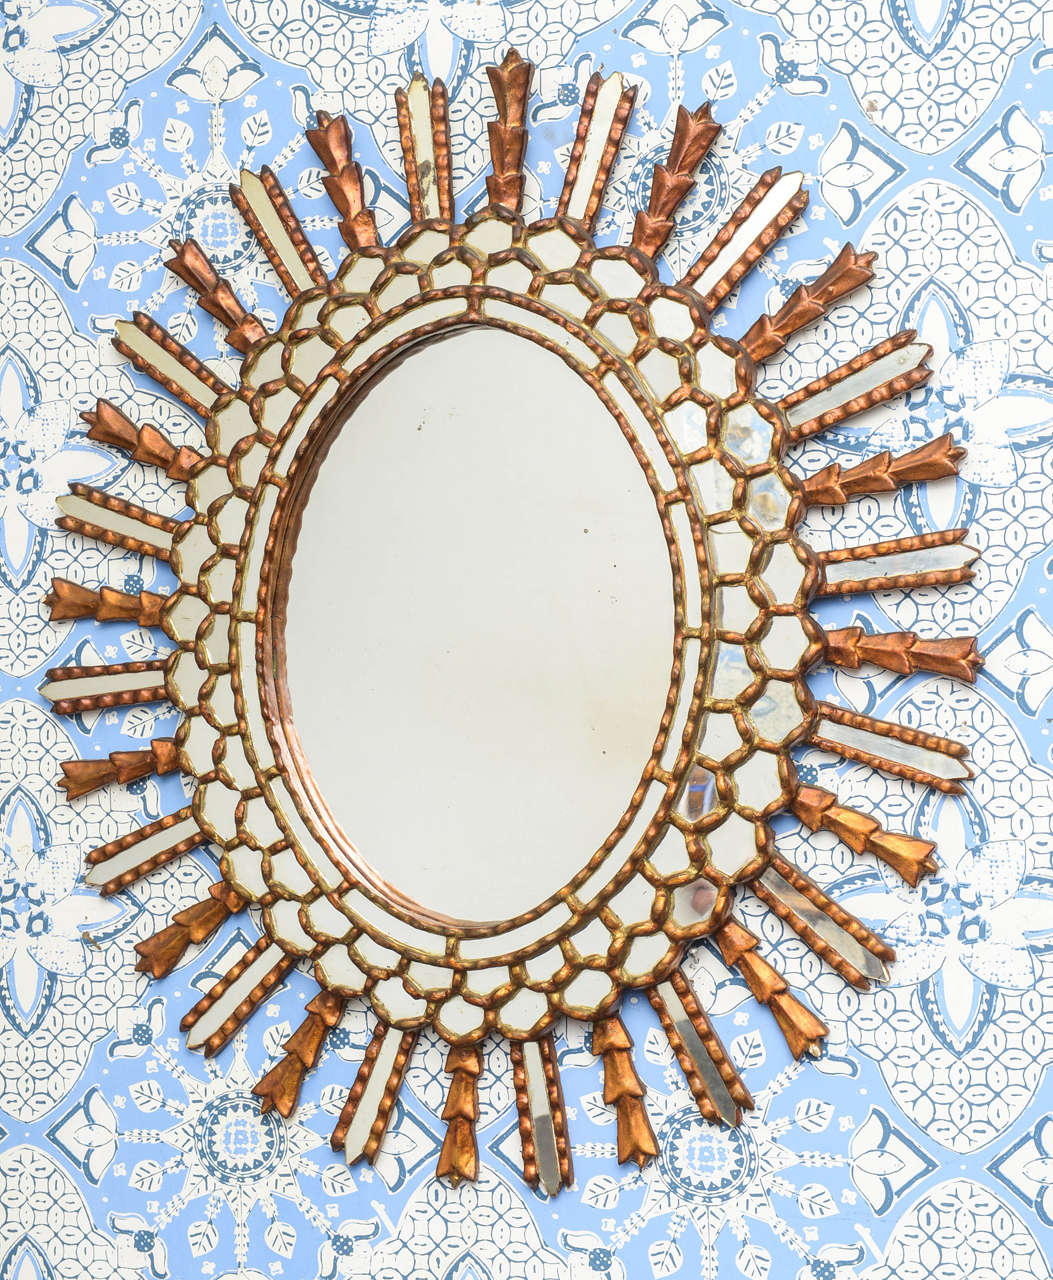 Very original oval starburst with plenty of mirrors and wood details.